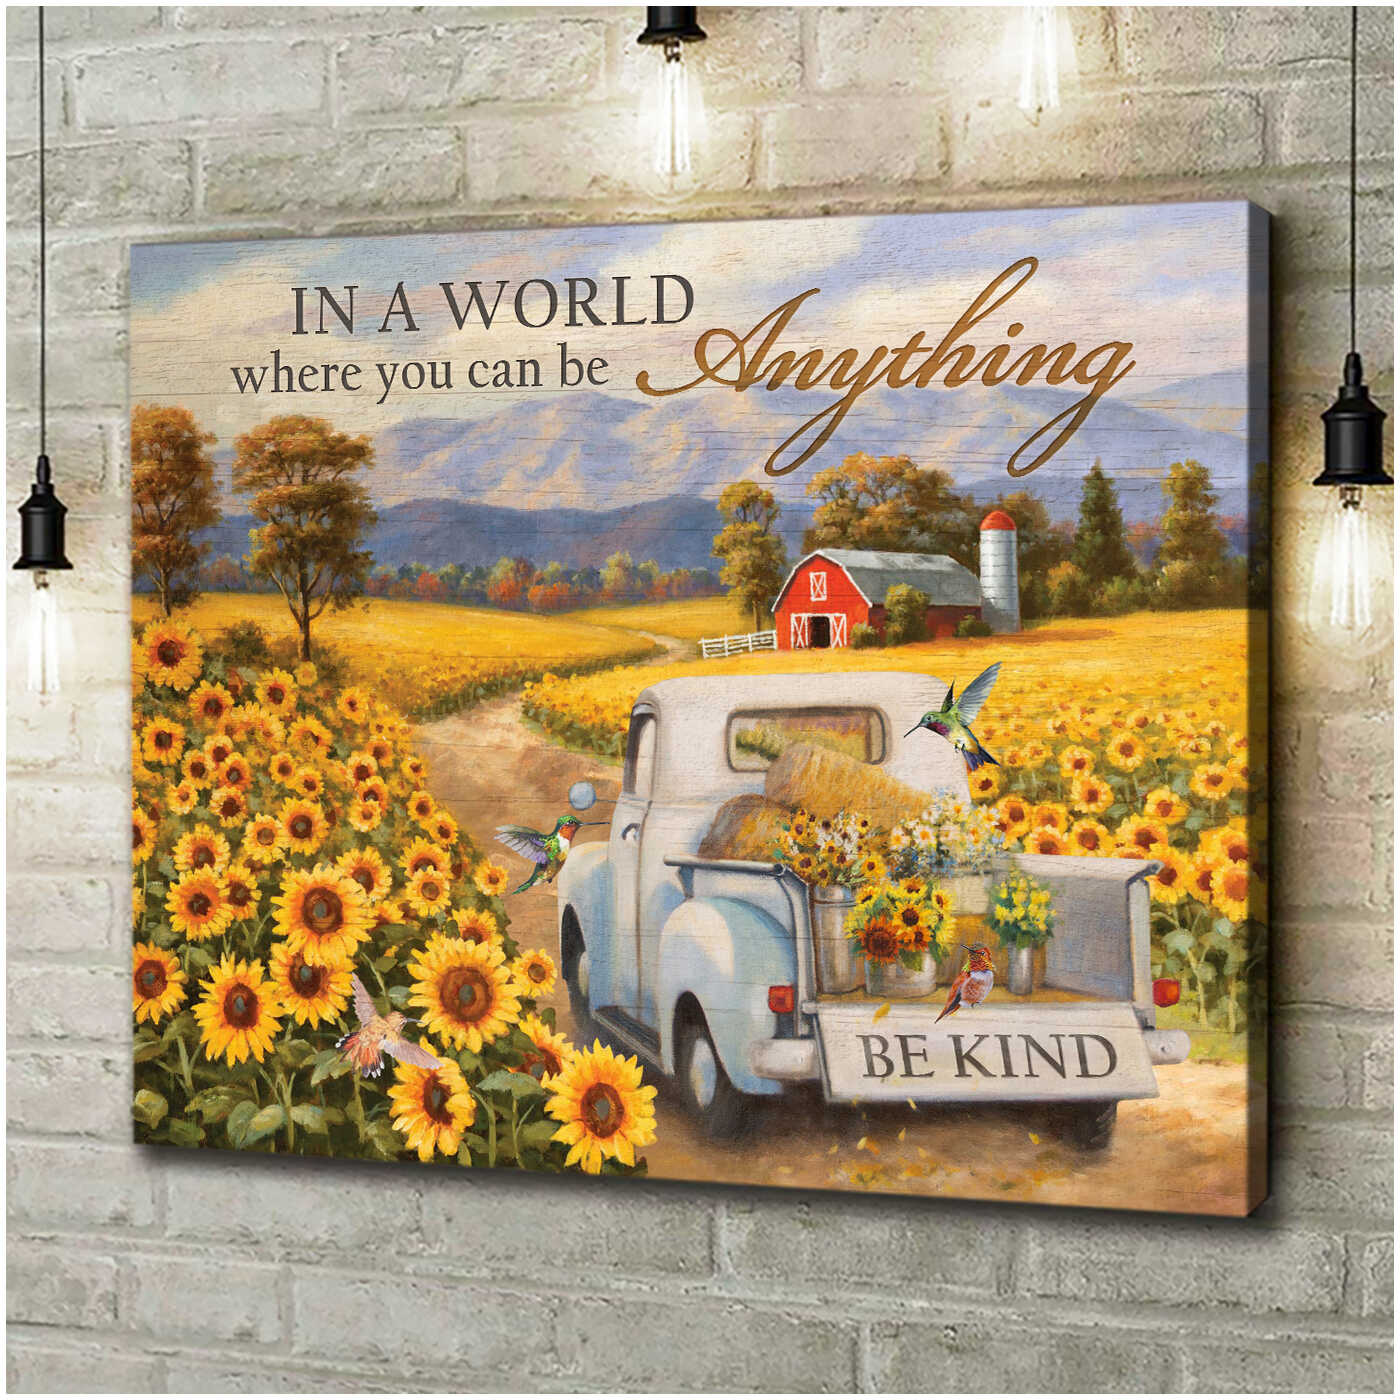 Summer Barn Hummingbirds Sunflower Pickup Truck In A World You Can Be Anything Be Kind Canvas Prints Wall Art Decor